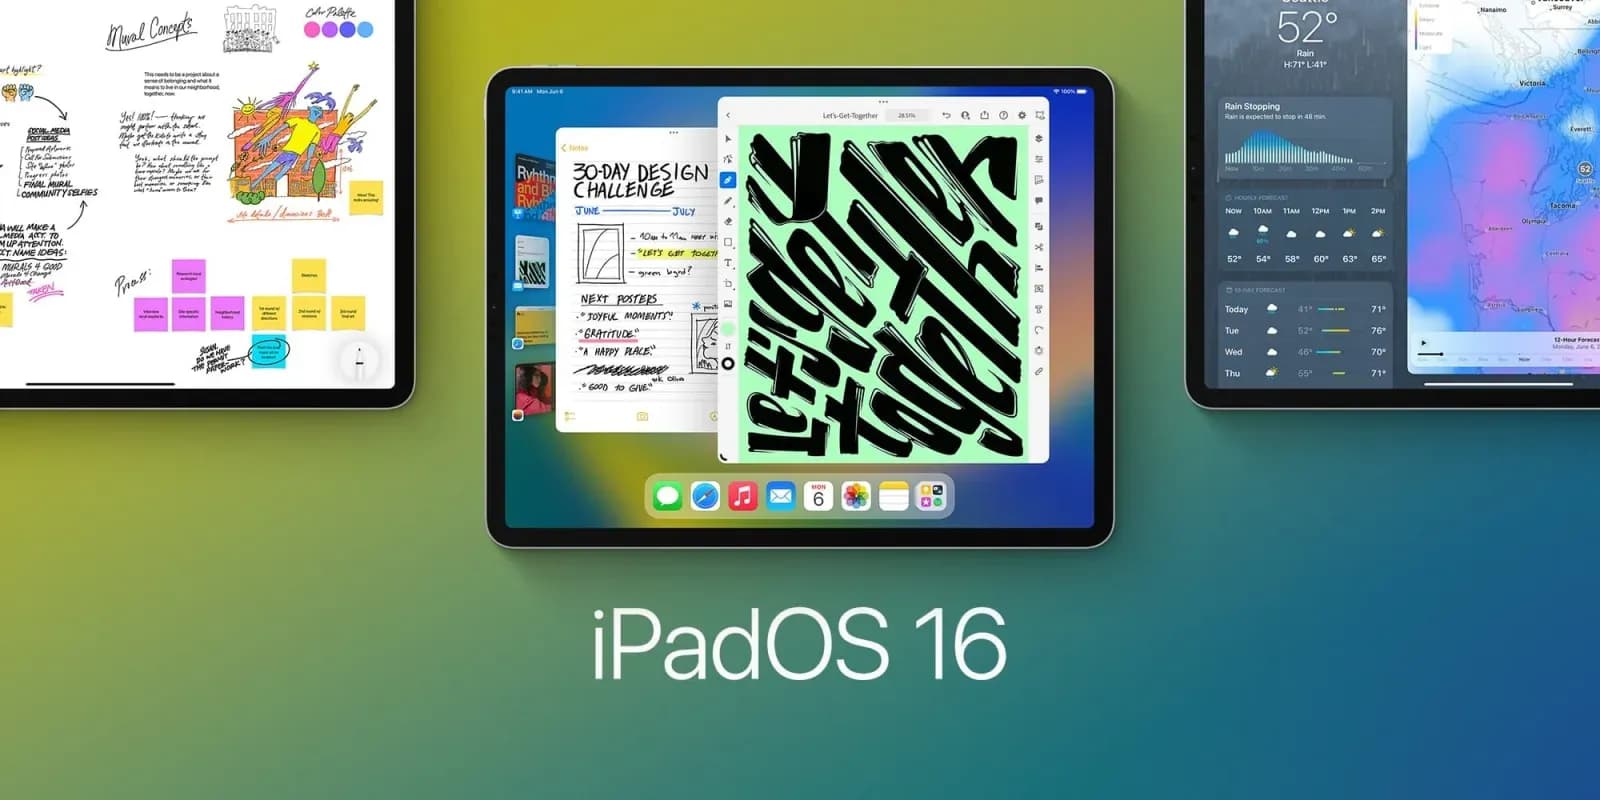  iPadOS 16 will have a better multitasking interface and app switching- ipadOS16 